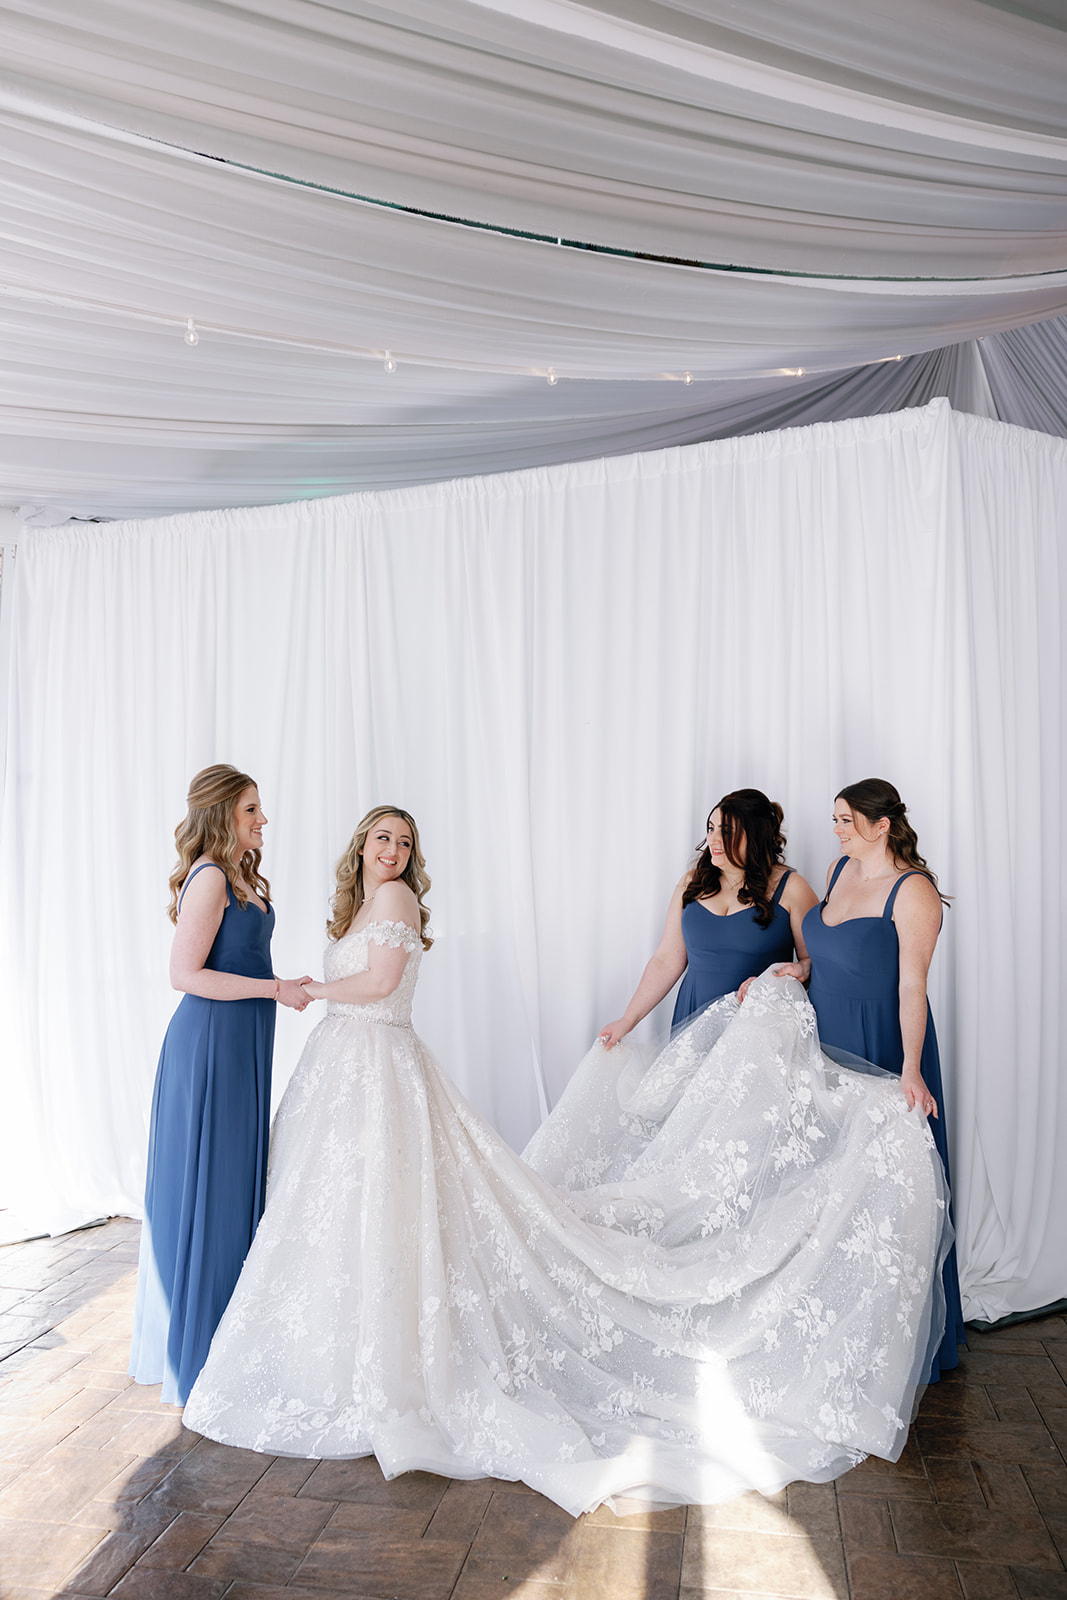 A bride is helped by her bridesmaids in blue dresses with her long lace train